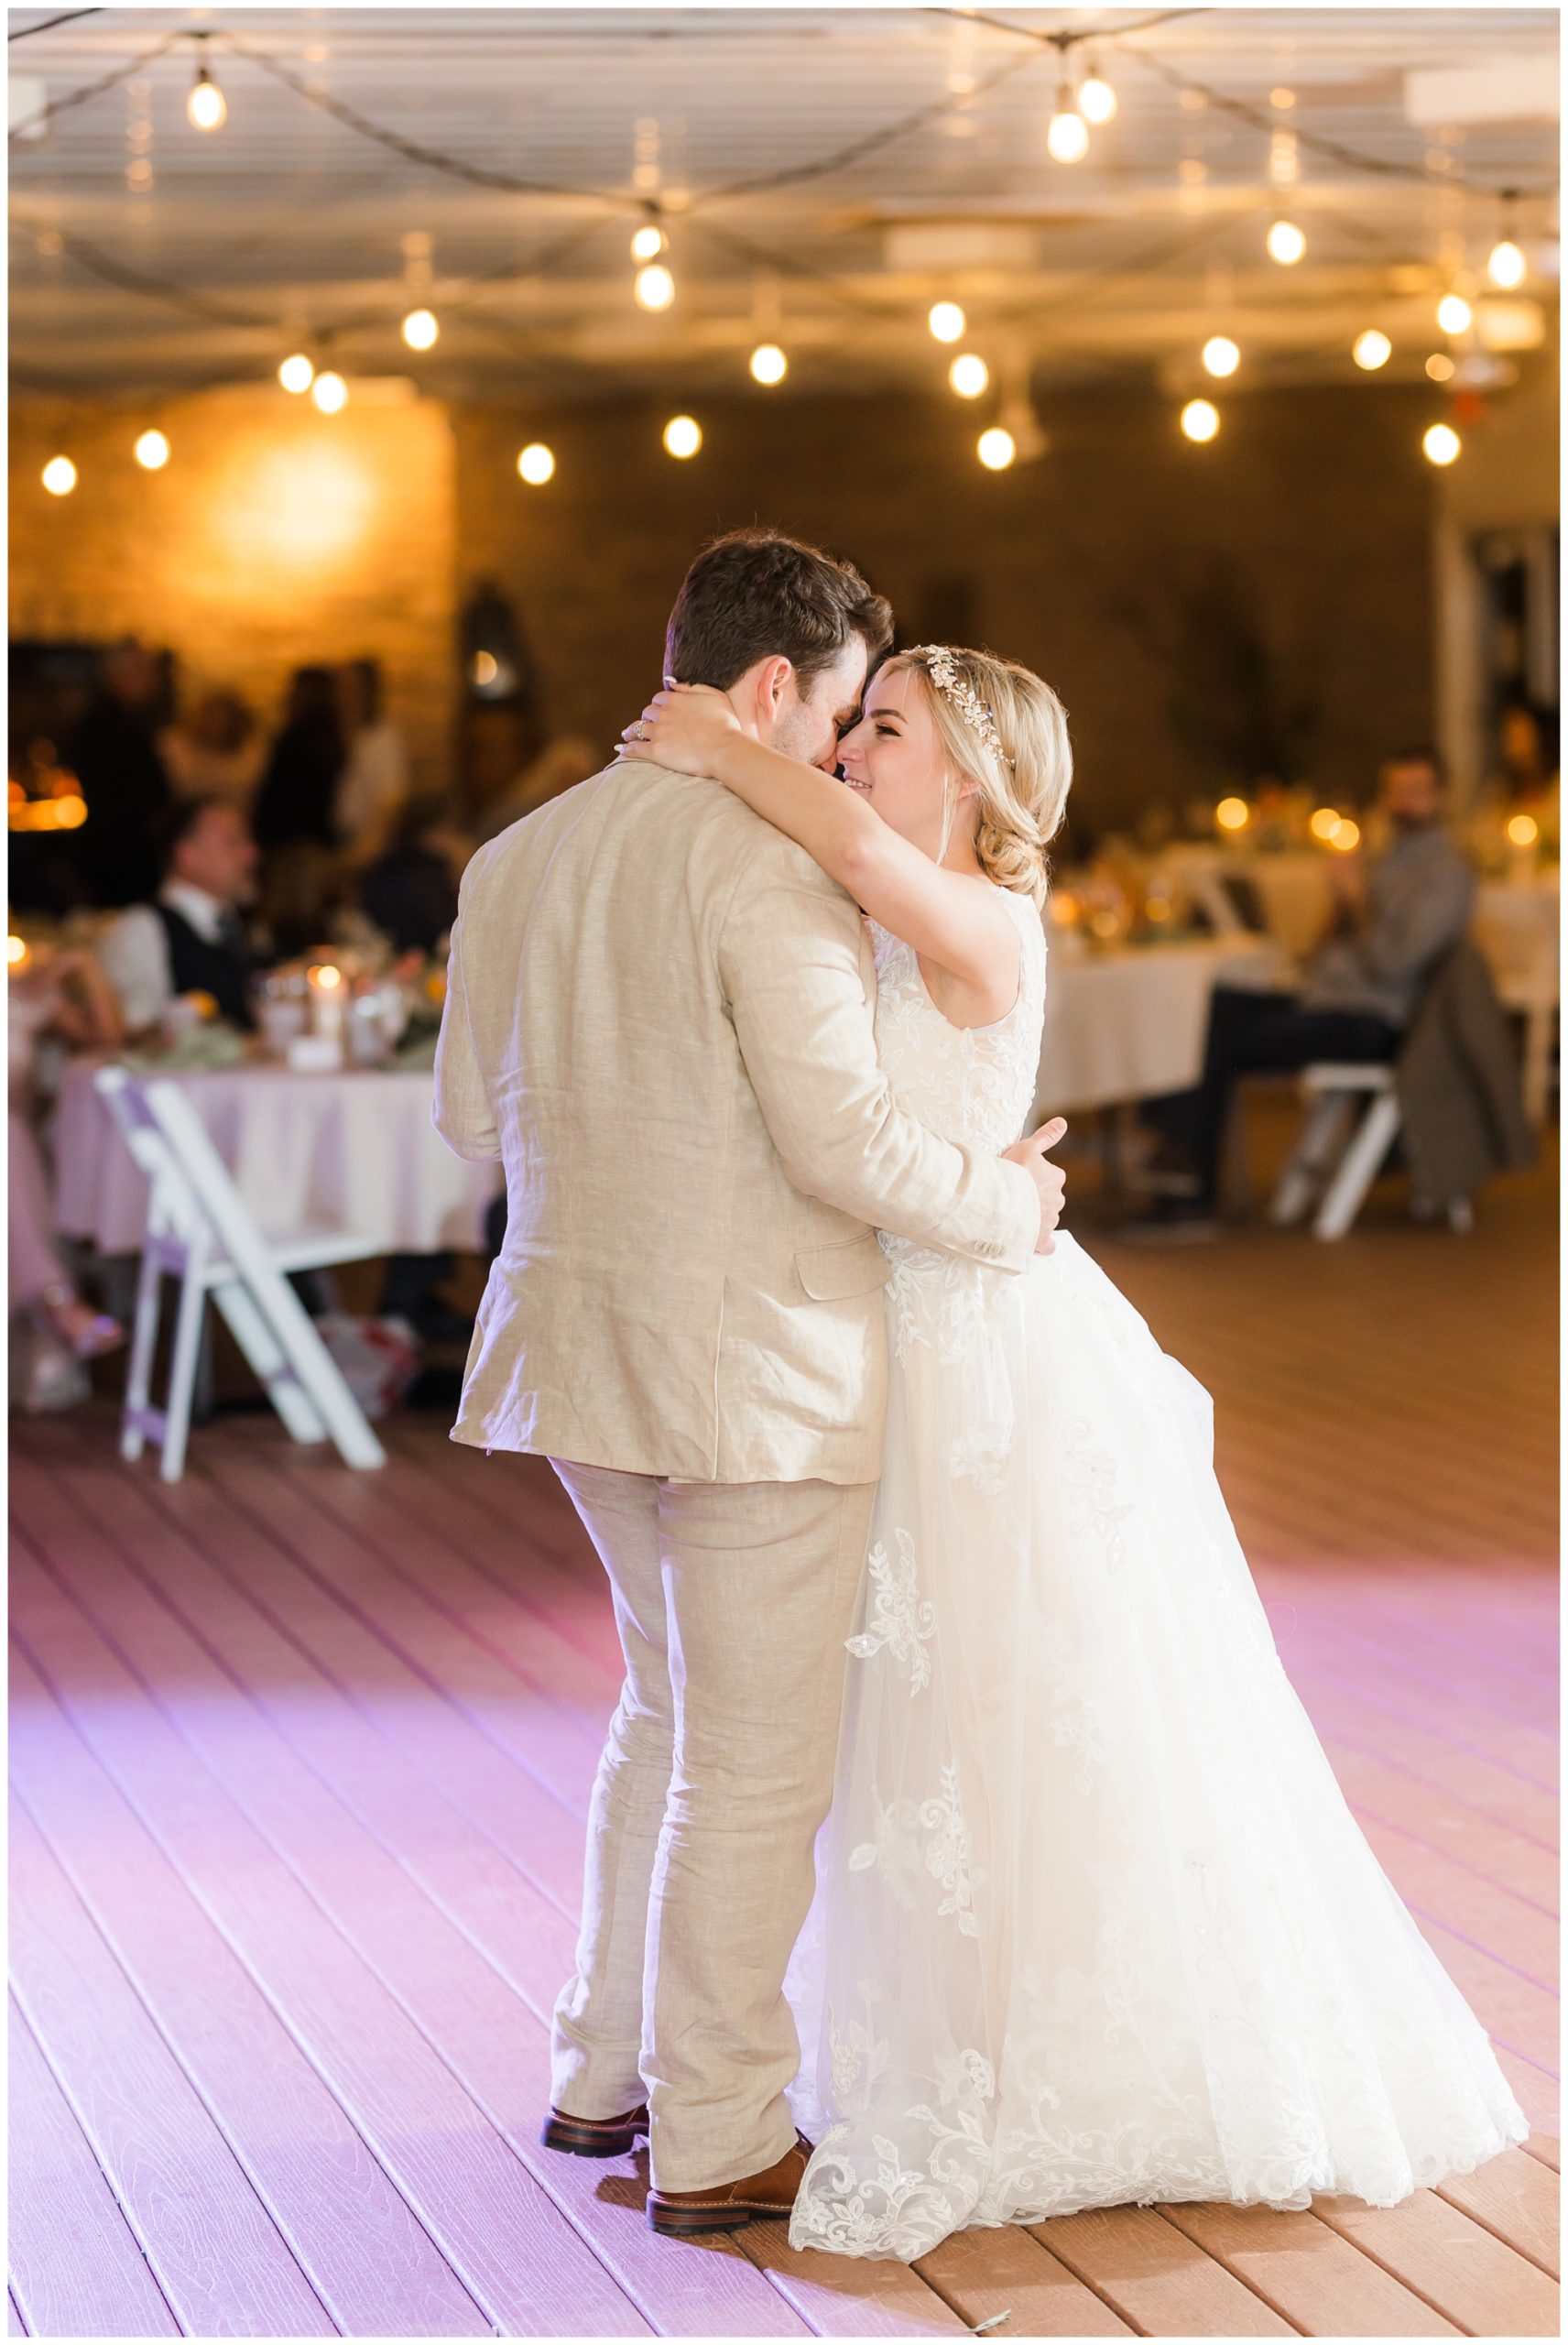 The bride and groom enjoy their first dance at the wedding reception at deception vineyard. 